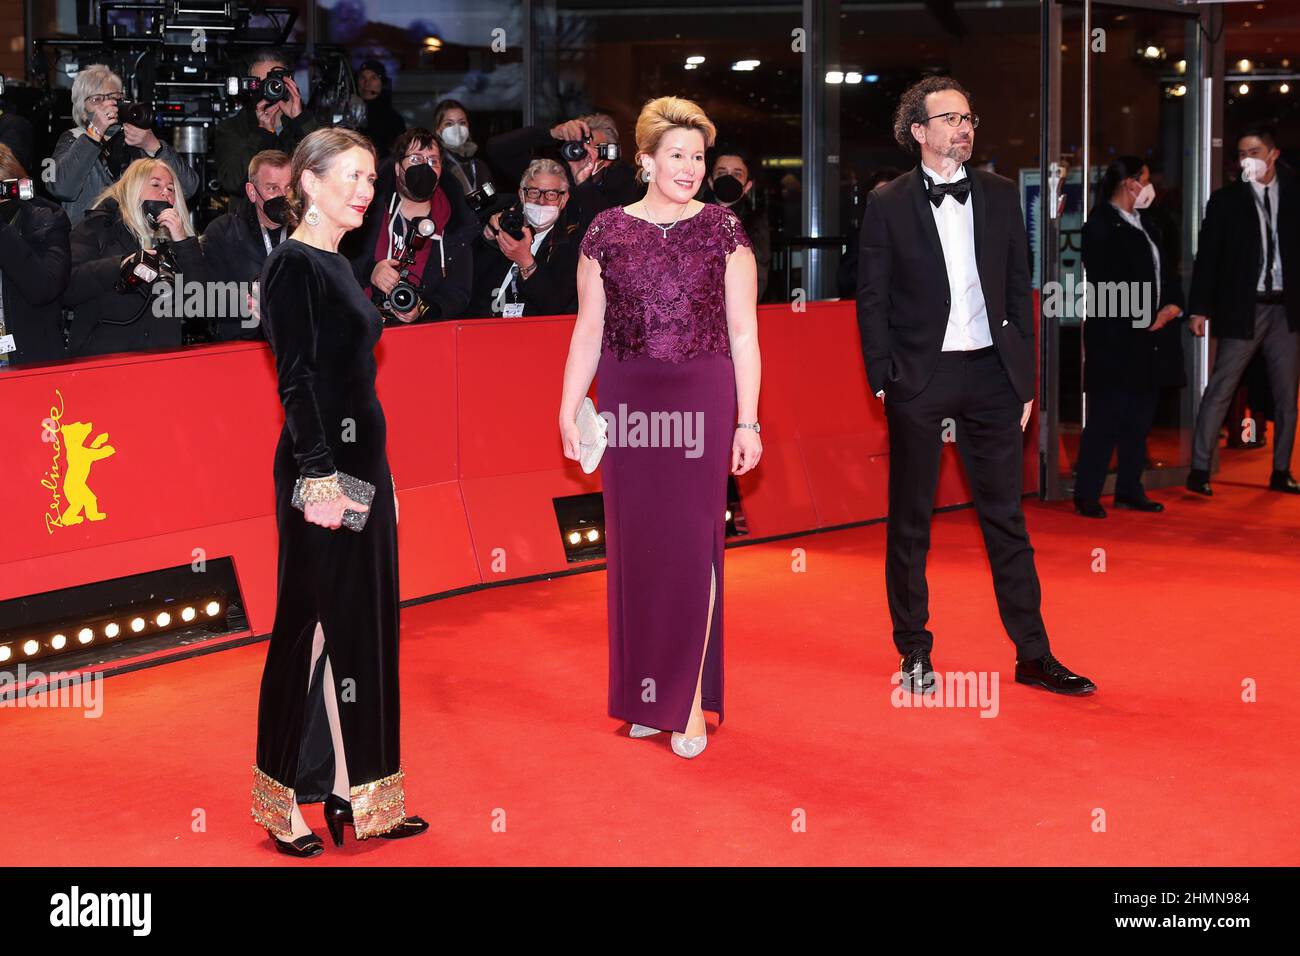 Berlin, Germany. 10th Feb, 2022. Mayor of Berlin Franziska Giffey (C), Berlinale Executive Director Mariette Rissenbeek (L) and Berlinale Artistic Director Carlo Chatrian pose for photo on the red carpet of the opening ceremony of the 72nd Berlin International Film Festival in Berlin, capital of Germany, Feb. 10, 2022. Germany's 72nd Berlin International Film Festival opens on Thursday at the Berlinale Palast with the world premiere of the lockdown film 'Peter von Kant' by French writer and director Francois Ozon. Credit: Shan Yuqi/Xinhua/Alamy Live News Stock Photo